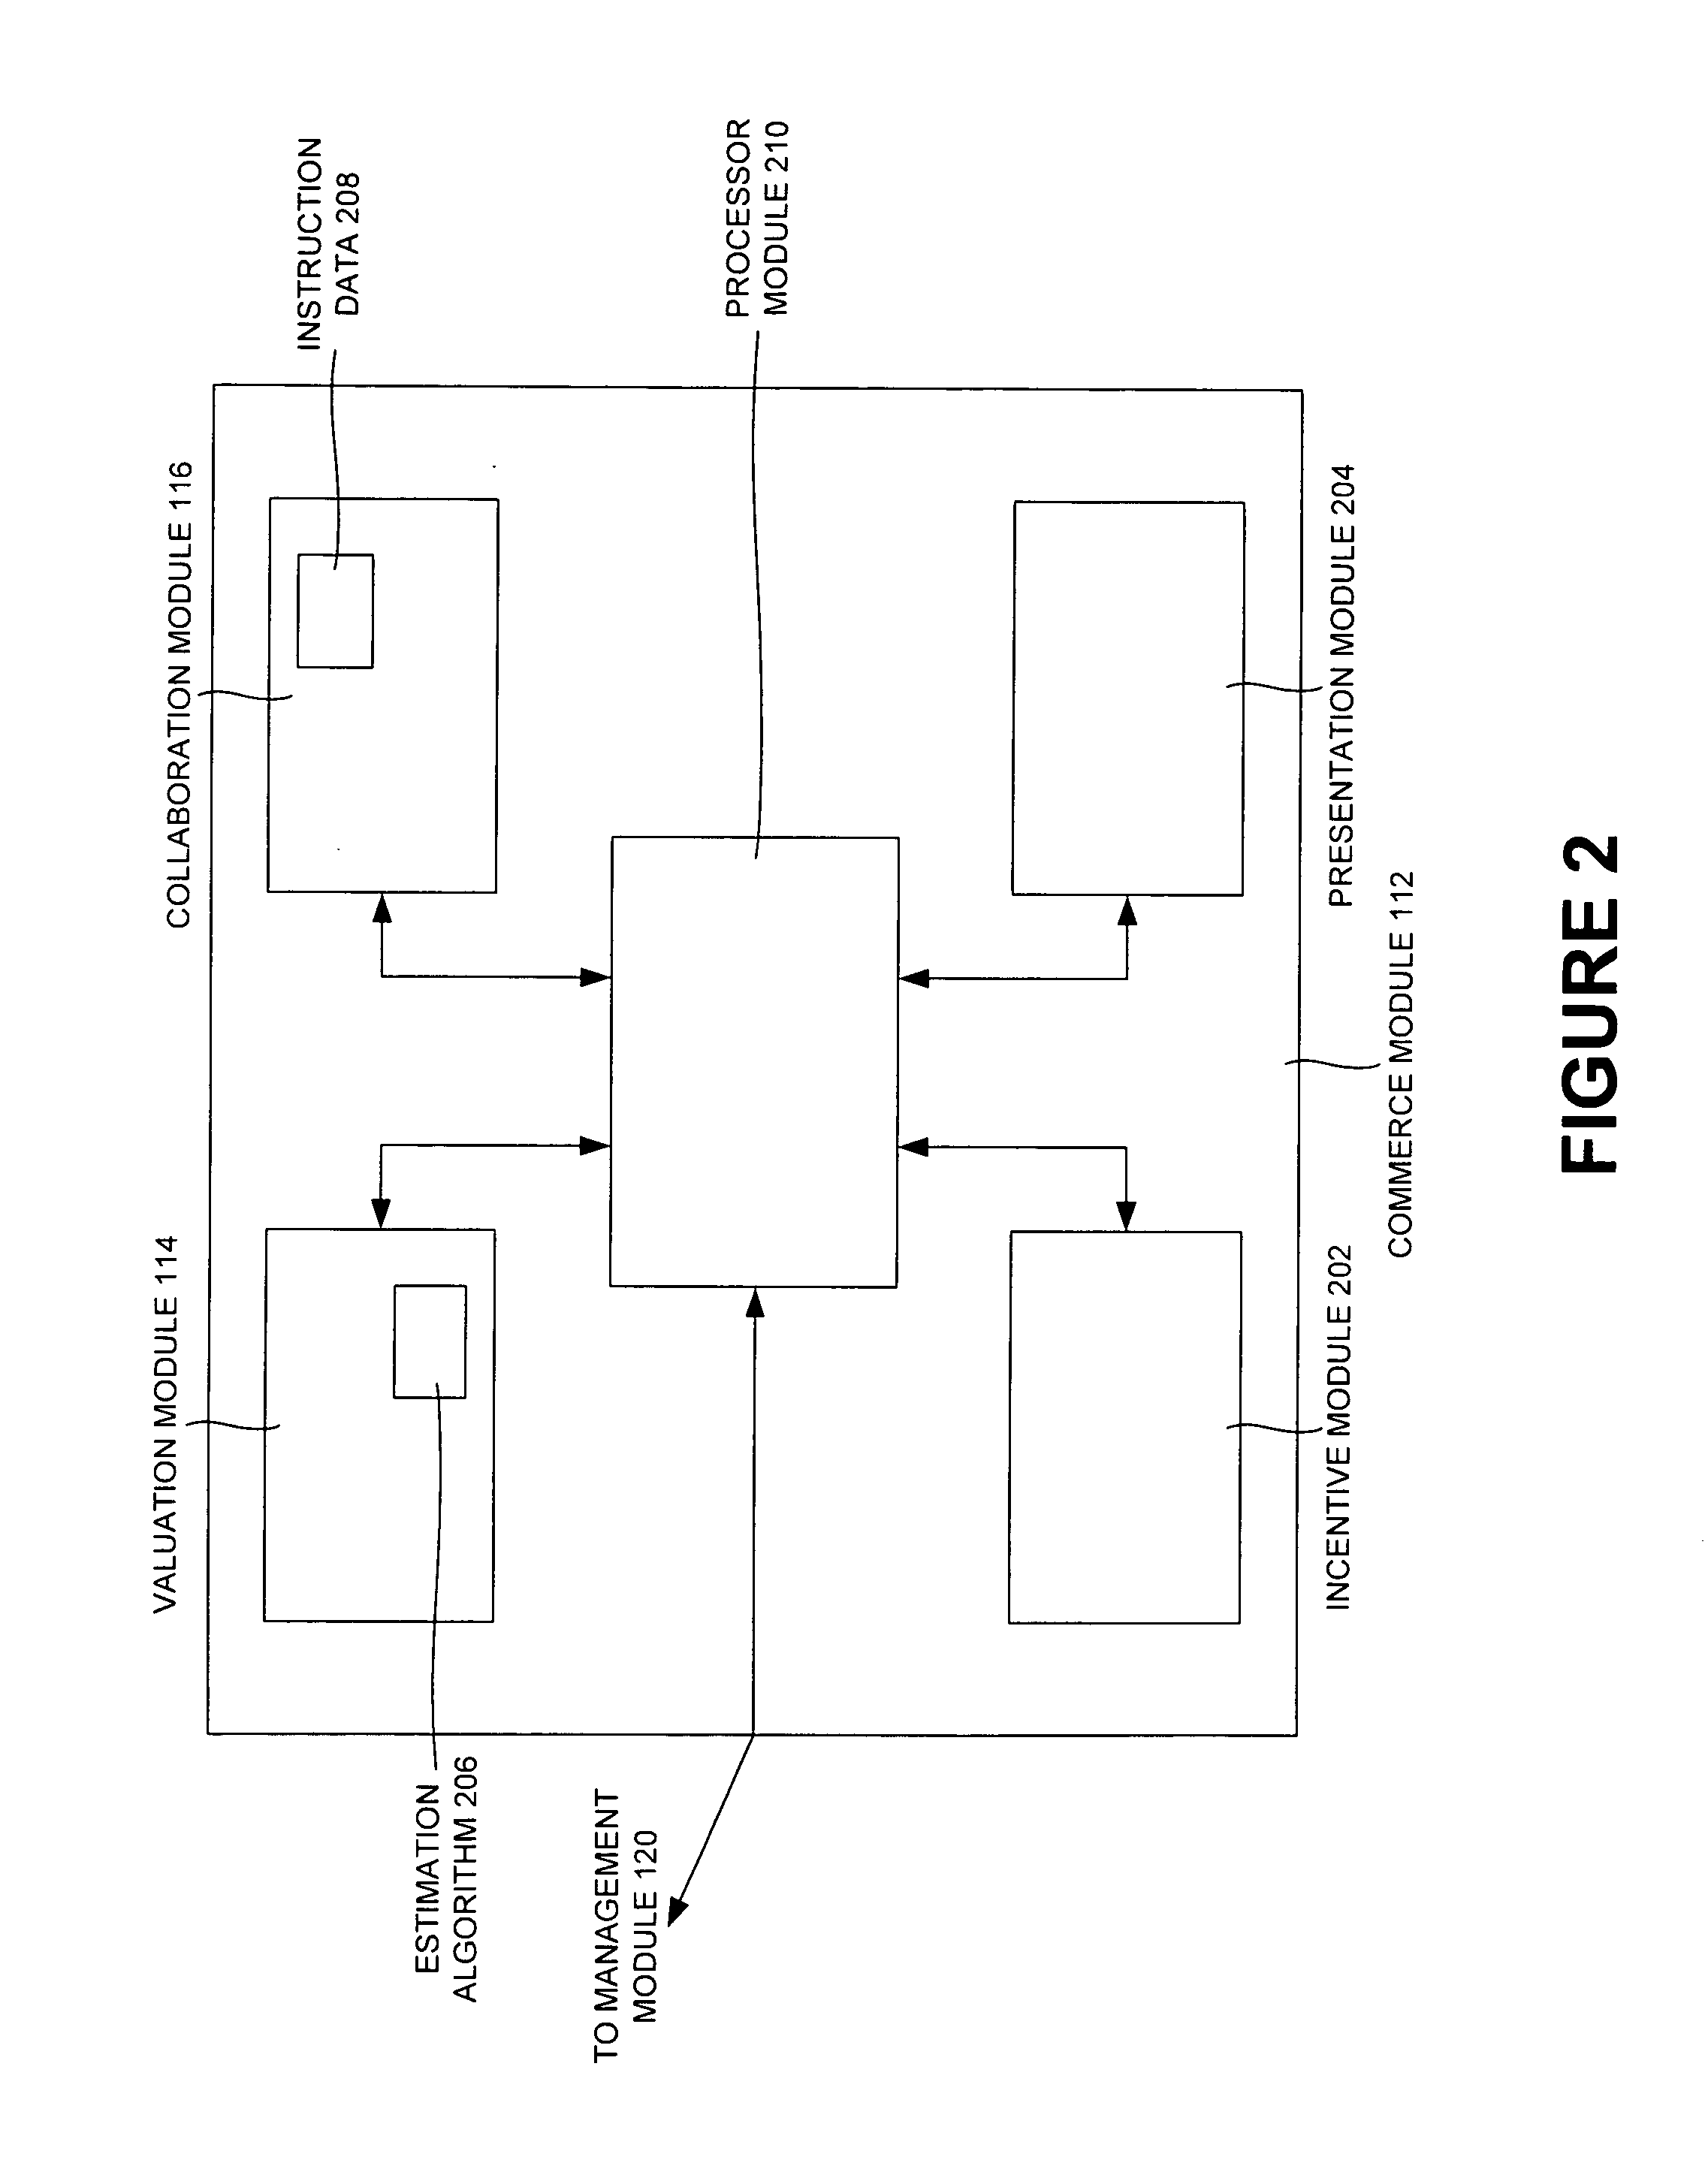 Value analysis and value added concoction of a beverage in a network environment of the beverage